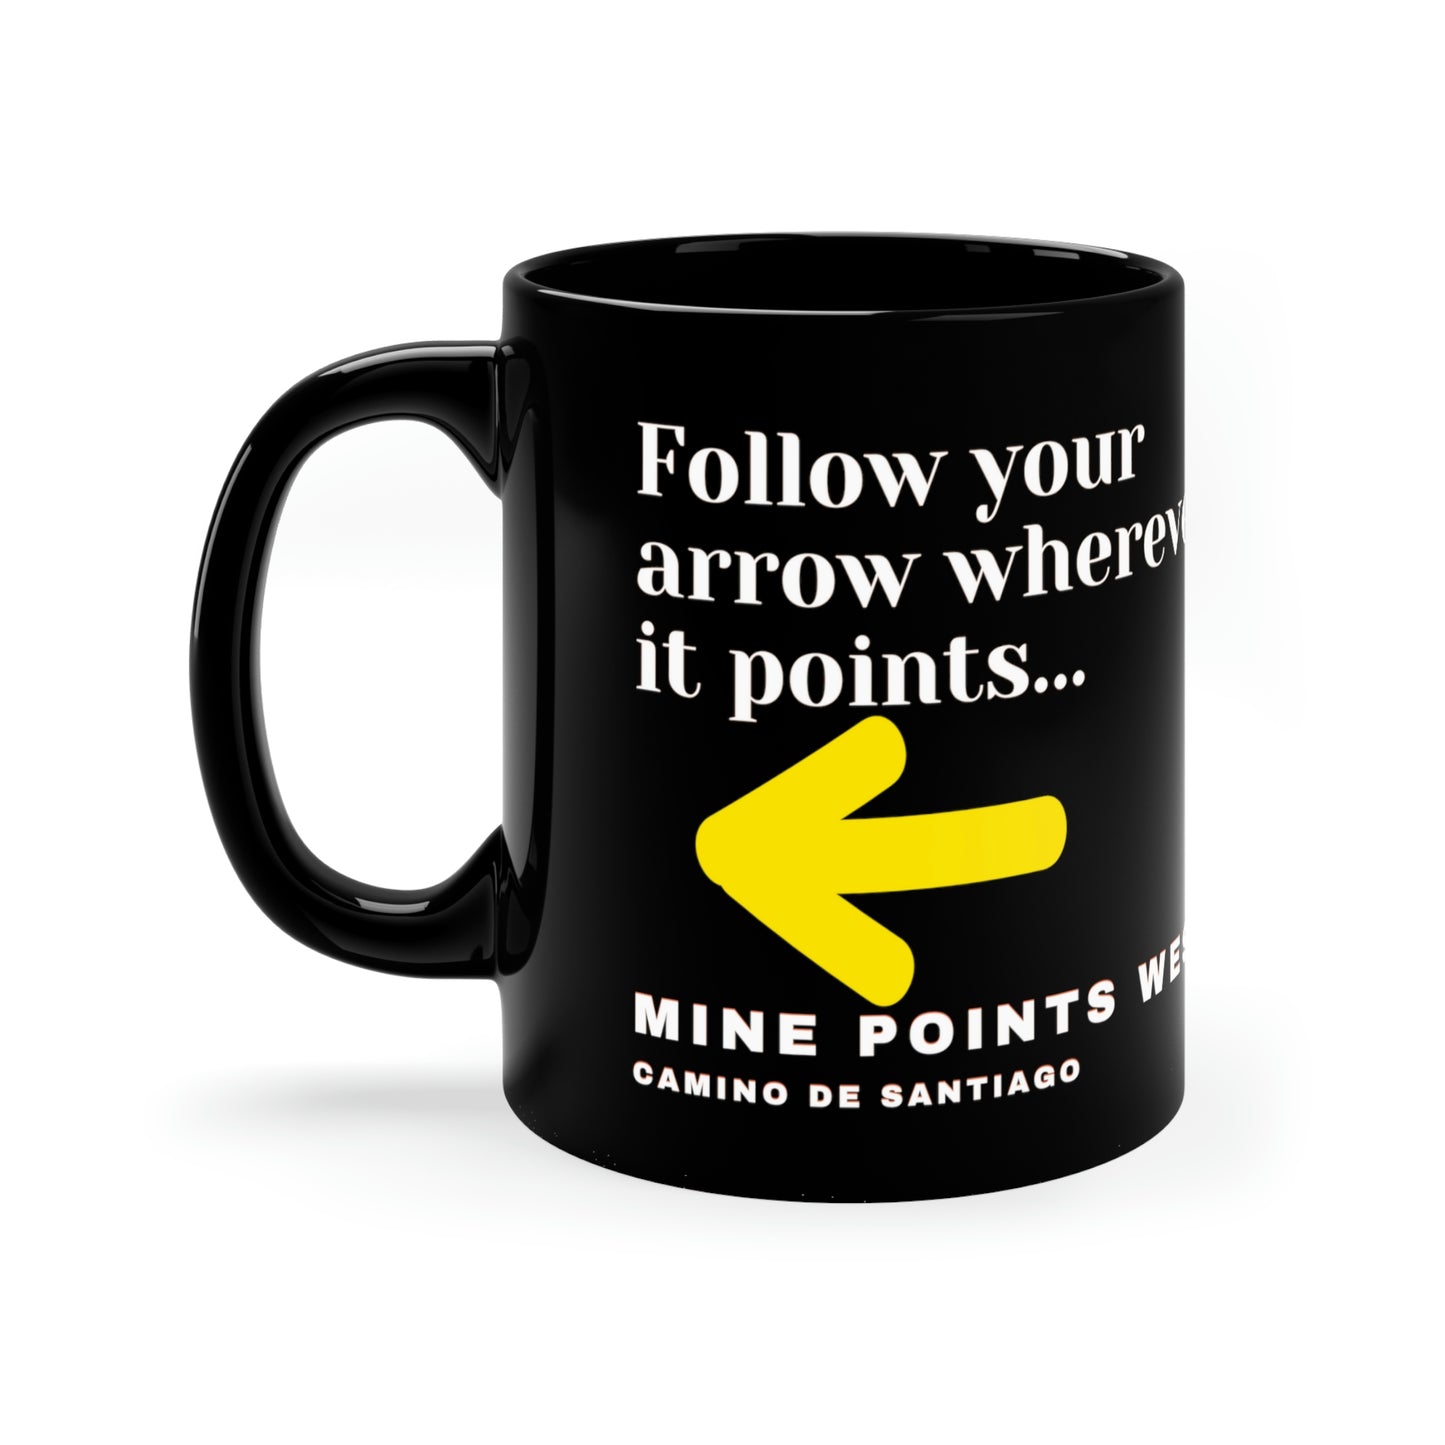 Camino Frances - This black ceramic mug has a slogan in white letters that says, Follow your arrow wherever it points . . . With a yellow arrow below it then below that the words, Mine Points West and under that Camino de Santiago. The Mug is surrounded by white background.